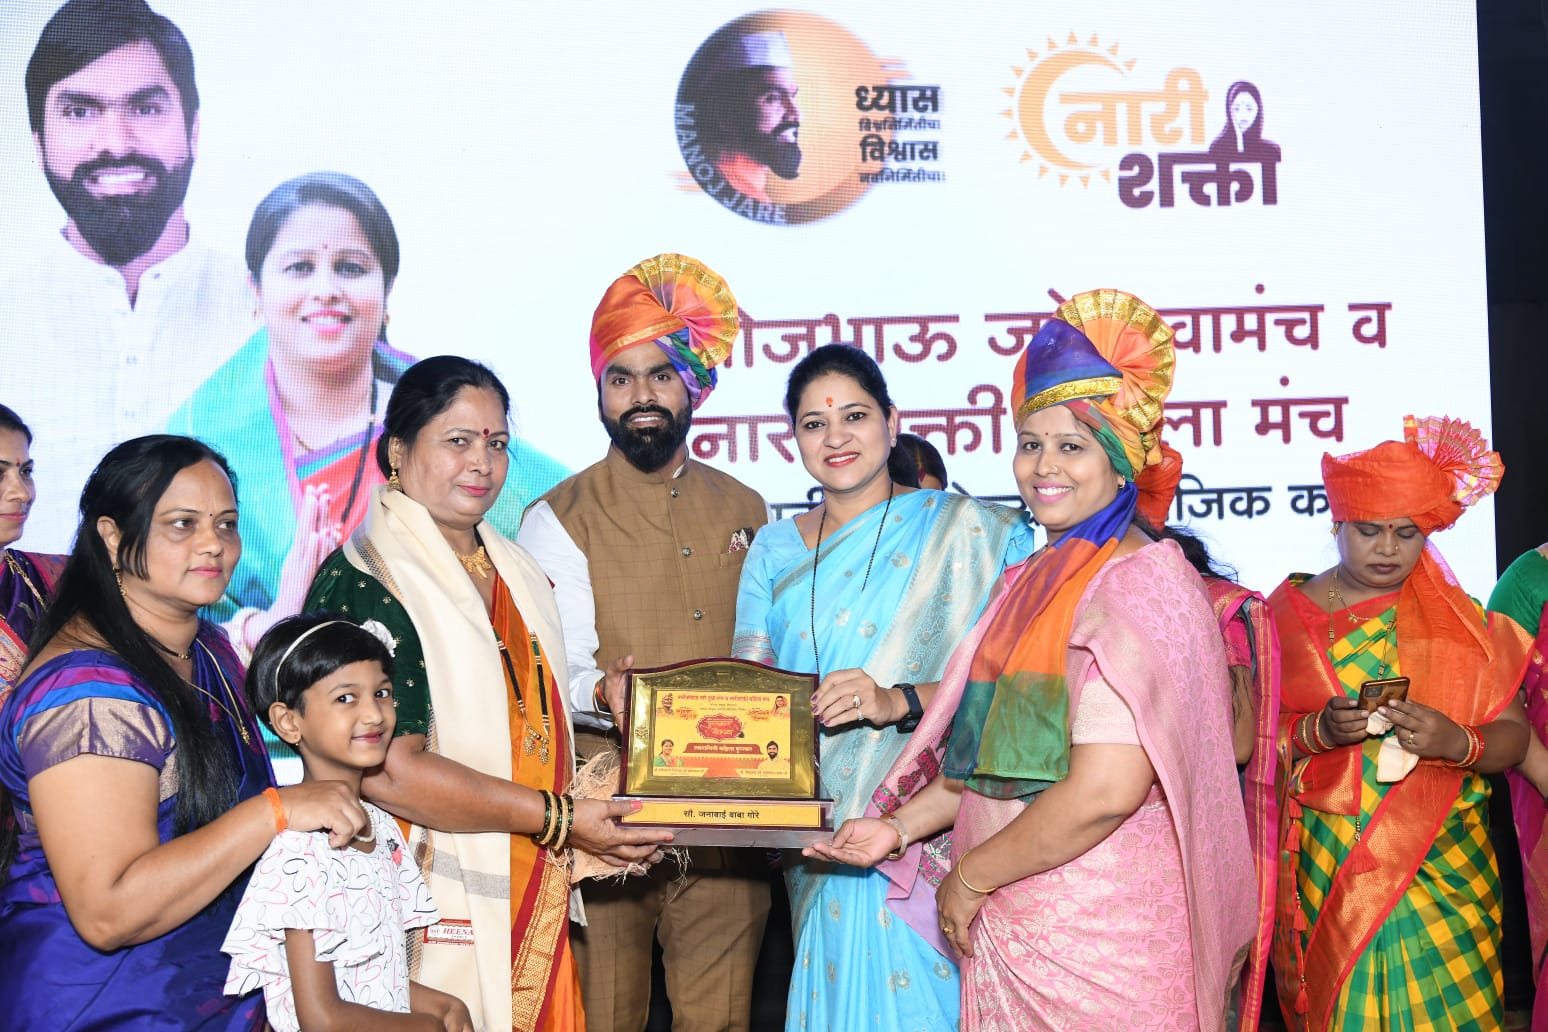 Manojbhau Jare Yuva Manch honors 250 persons from various fields with "Samaj Bhushan" awards